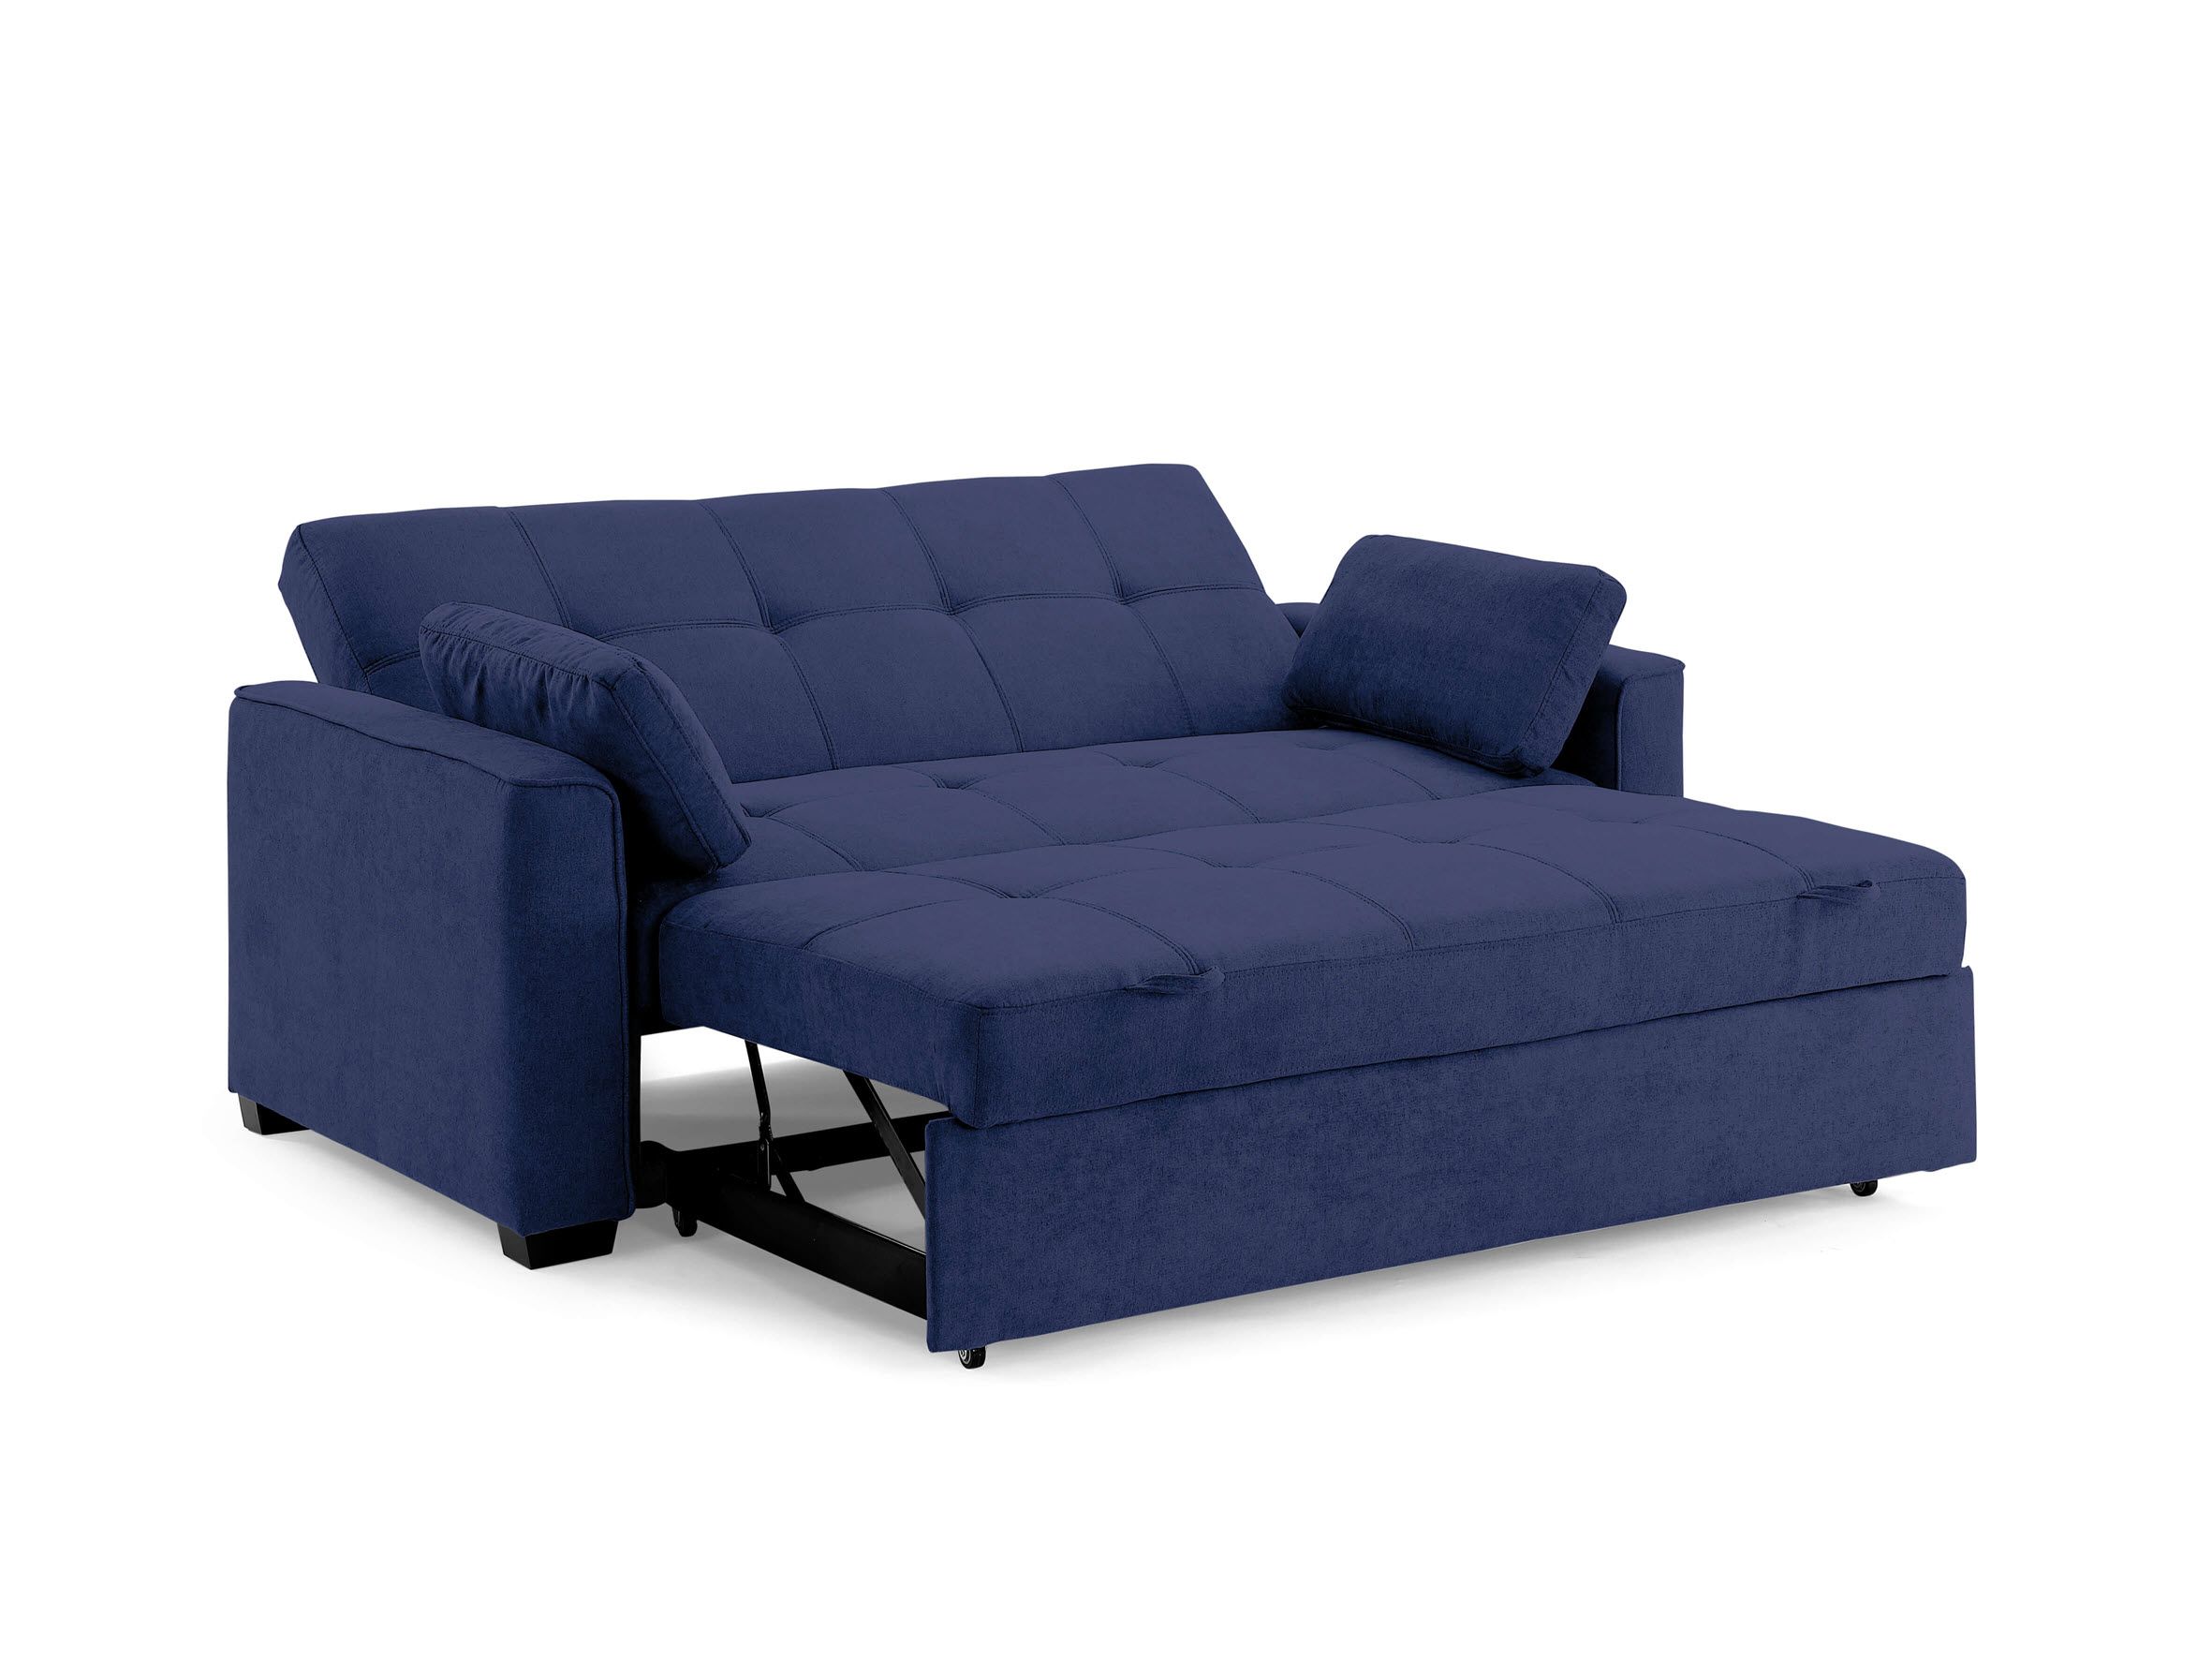 Cape Cod Nantucket Futon Sofa Sleeper Bed Navy Blue | Sleepworks For Navy Sleeper Sofa Couches (View 7 of 15)